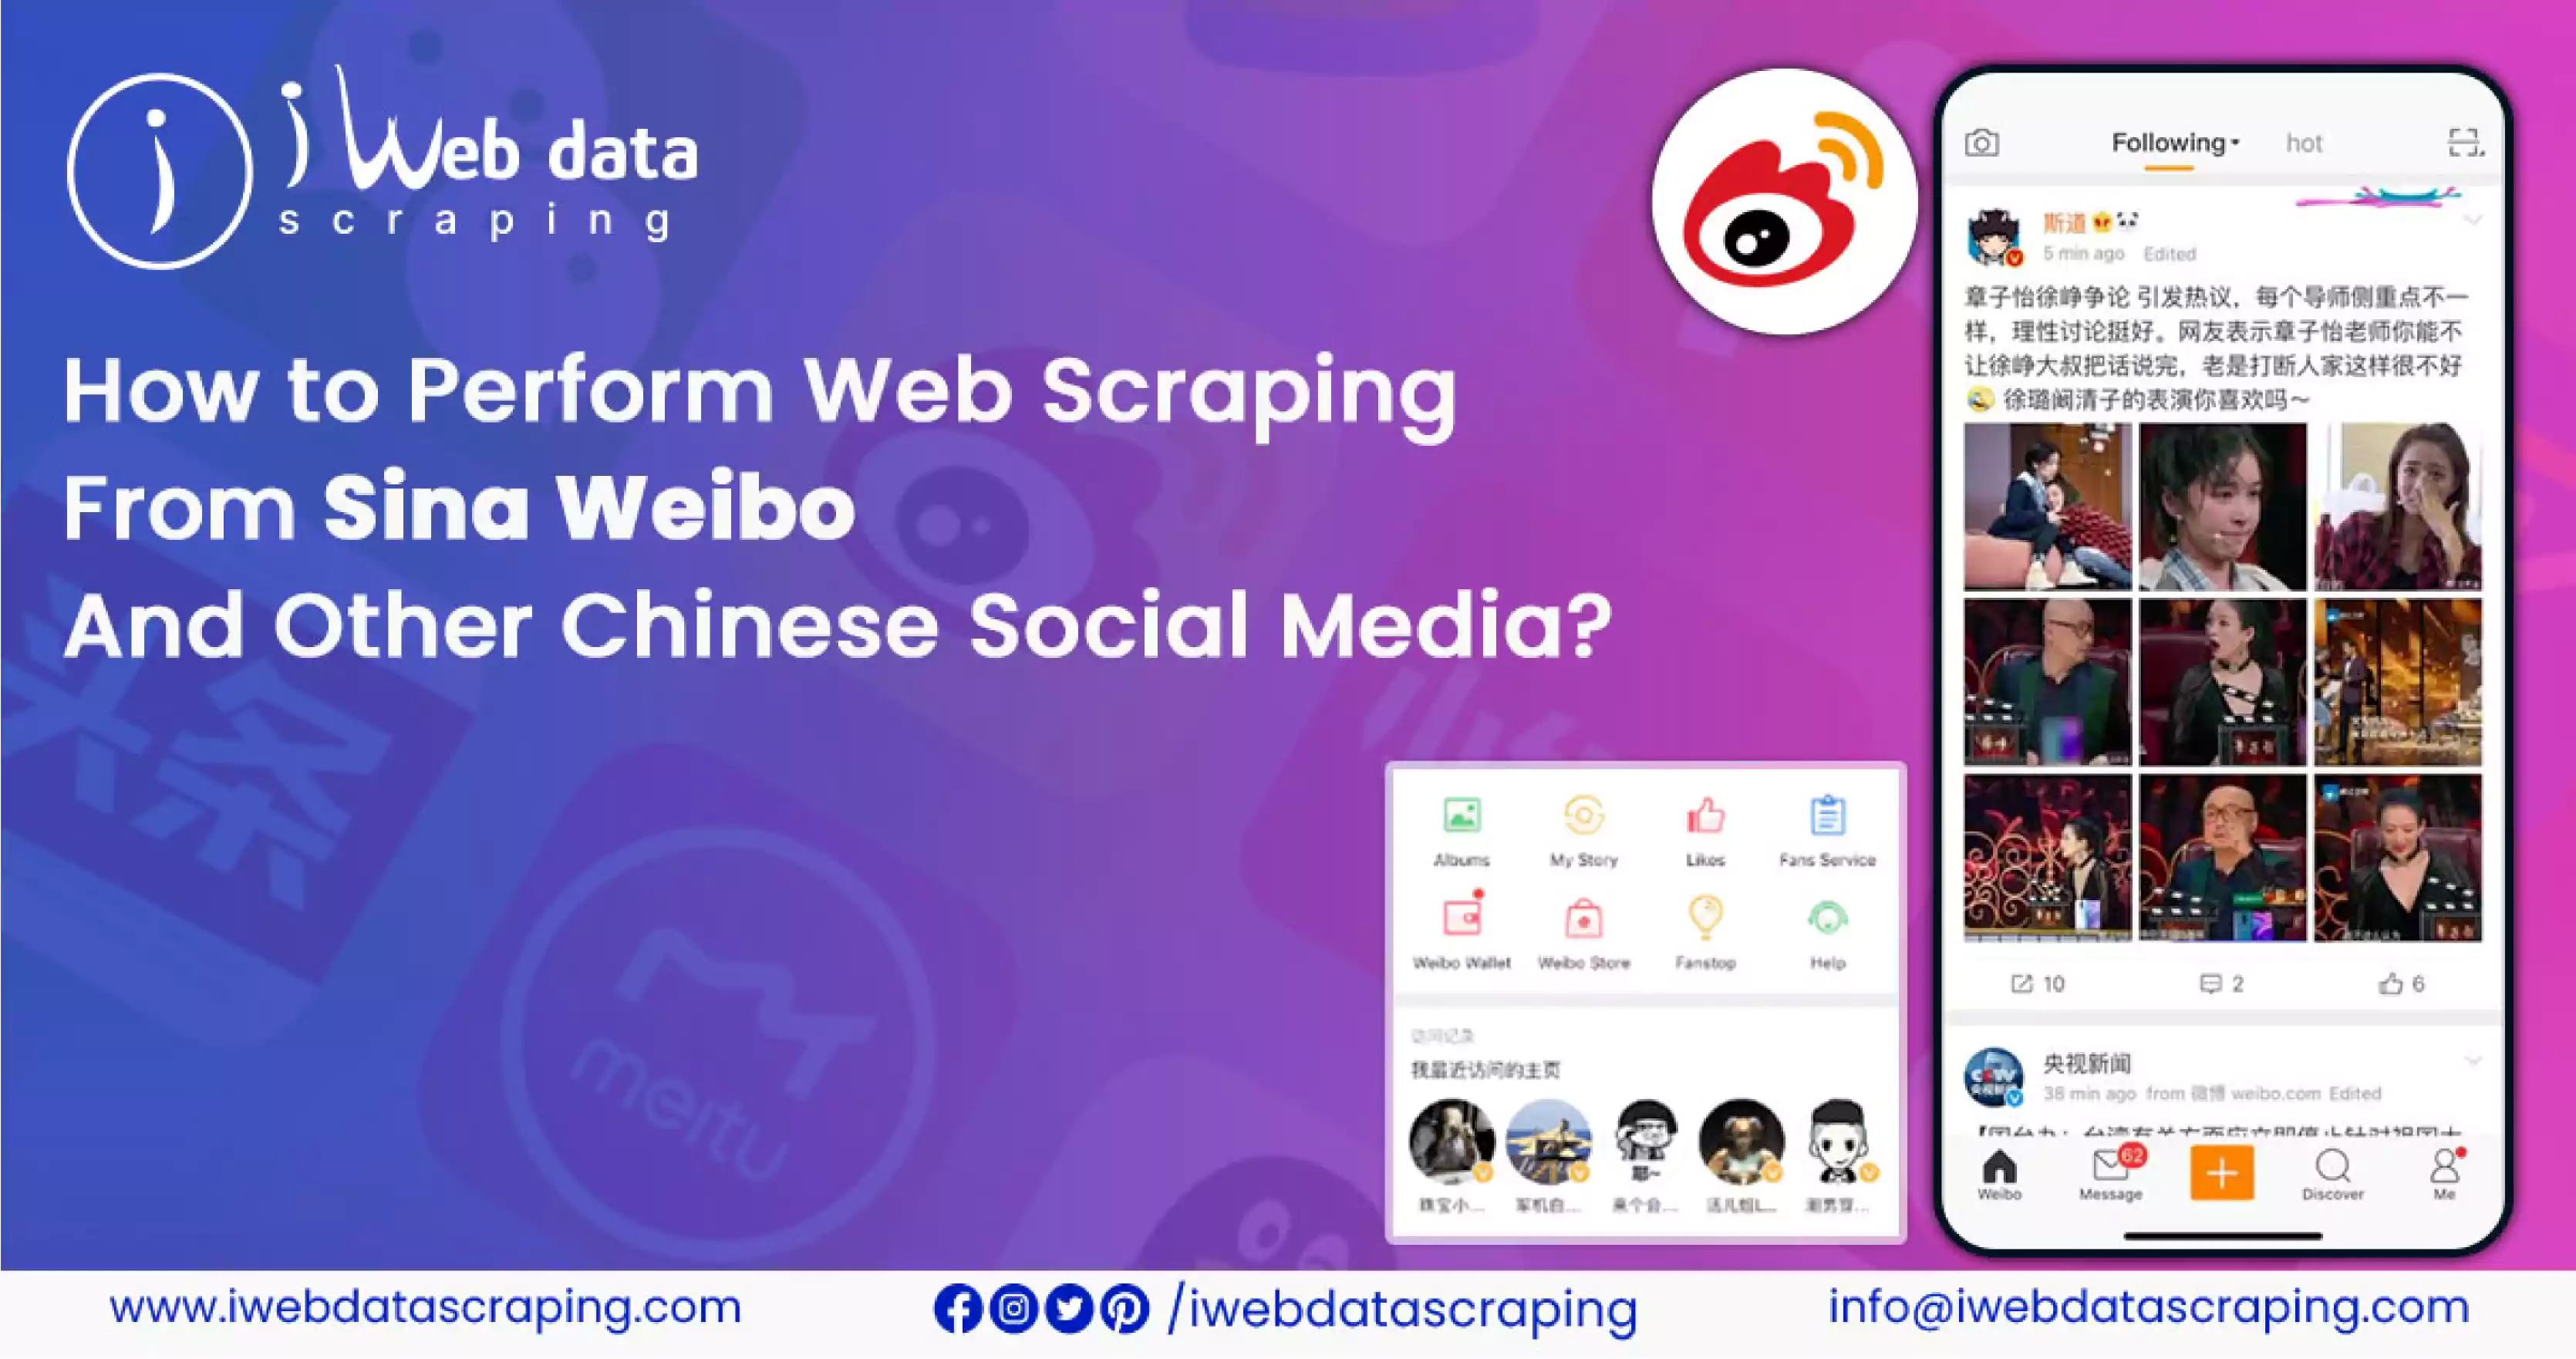 How-to-Perform-Web-Scraping-from-Sina-Weibo-and-other-Chinese-Social-Media.jpg